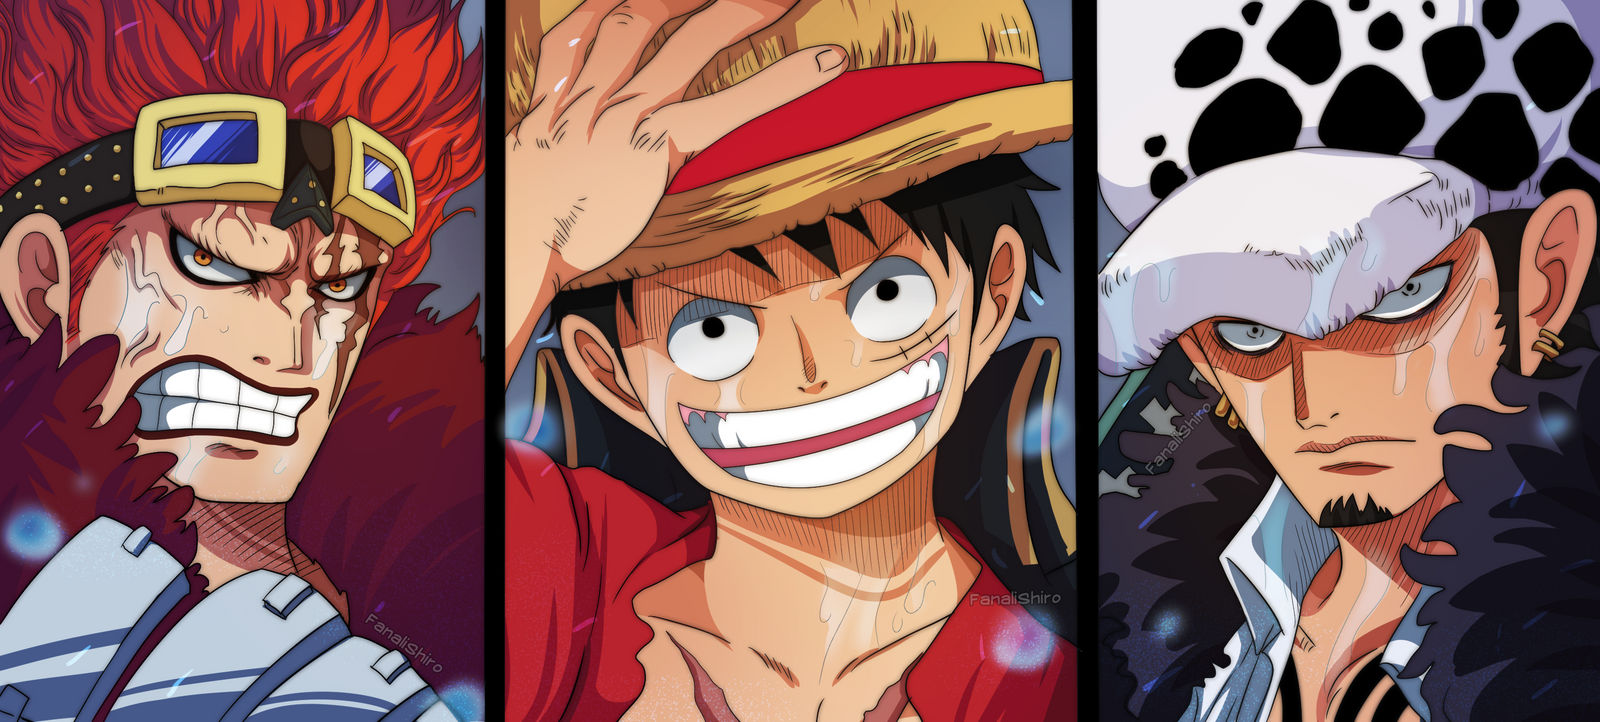 Kid Luffy And Law One Piece Ch 974 By Fanalishiro On Deviantart